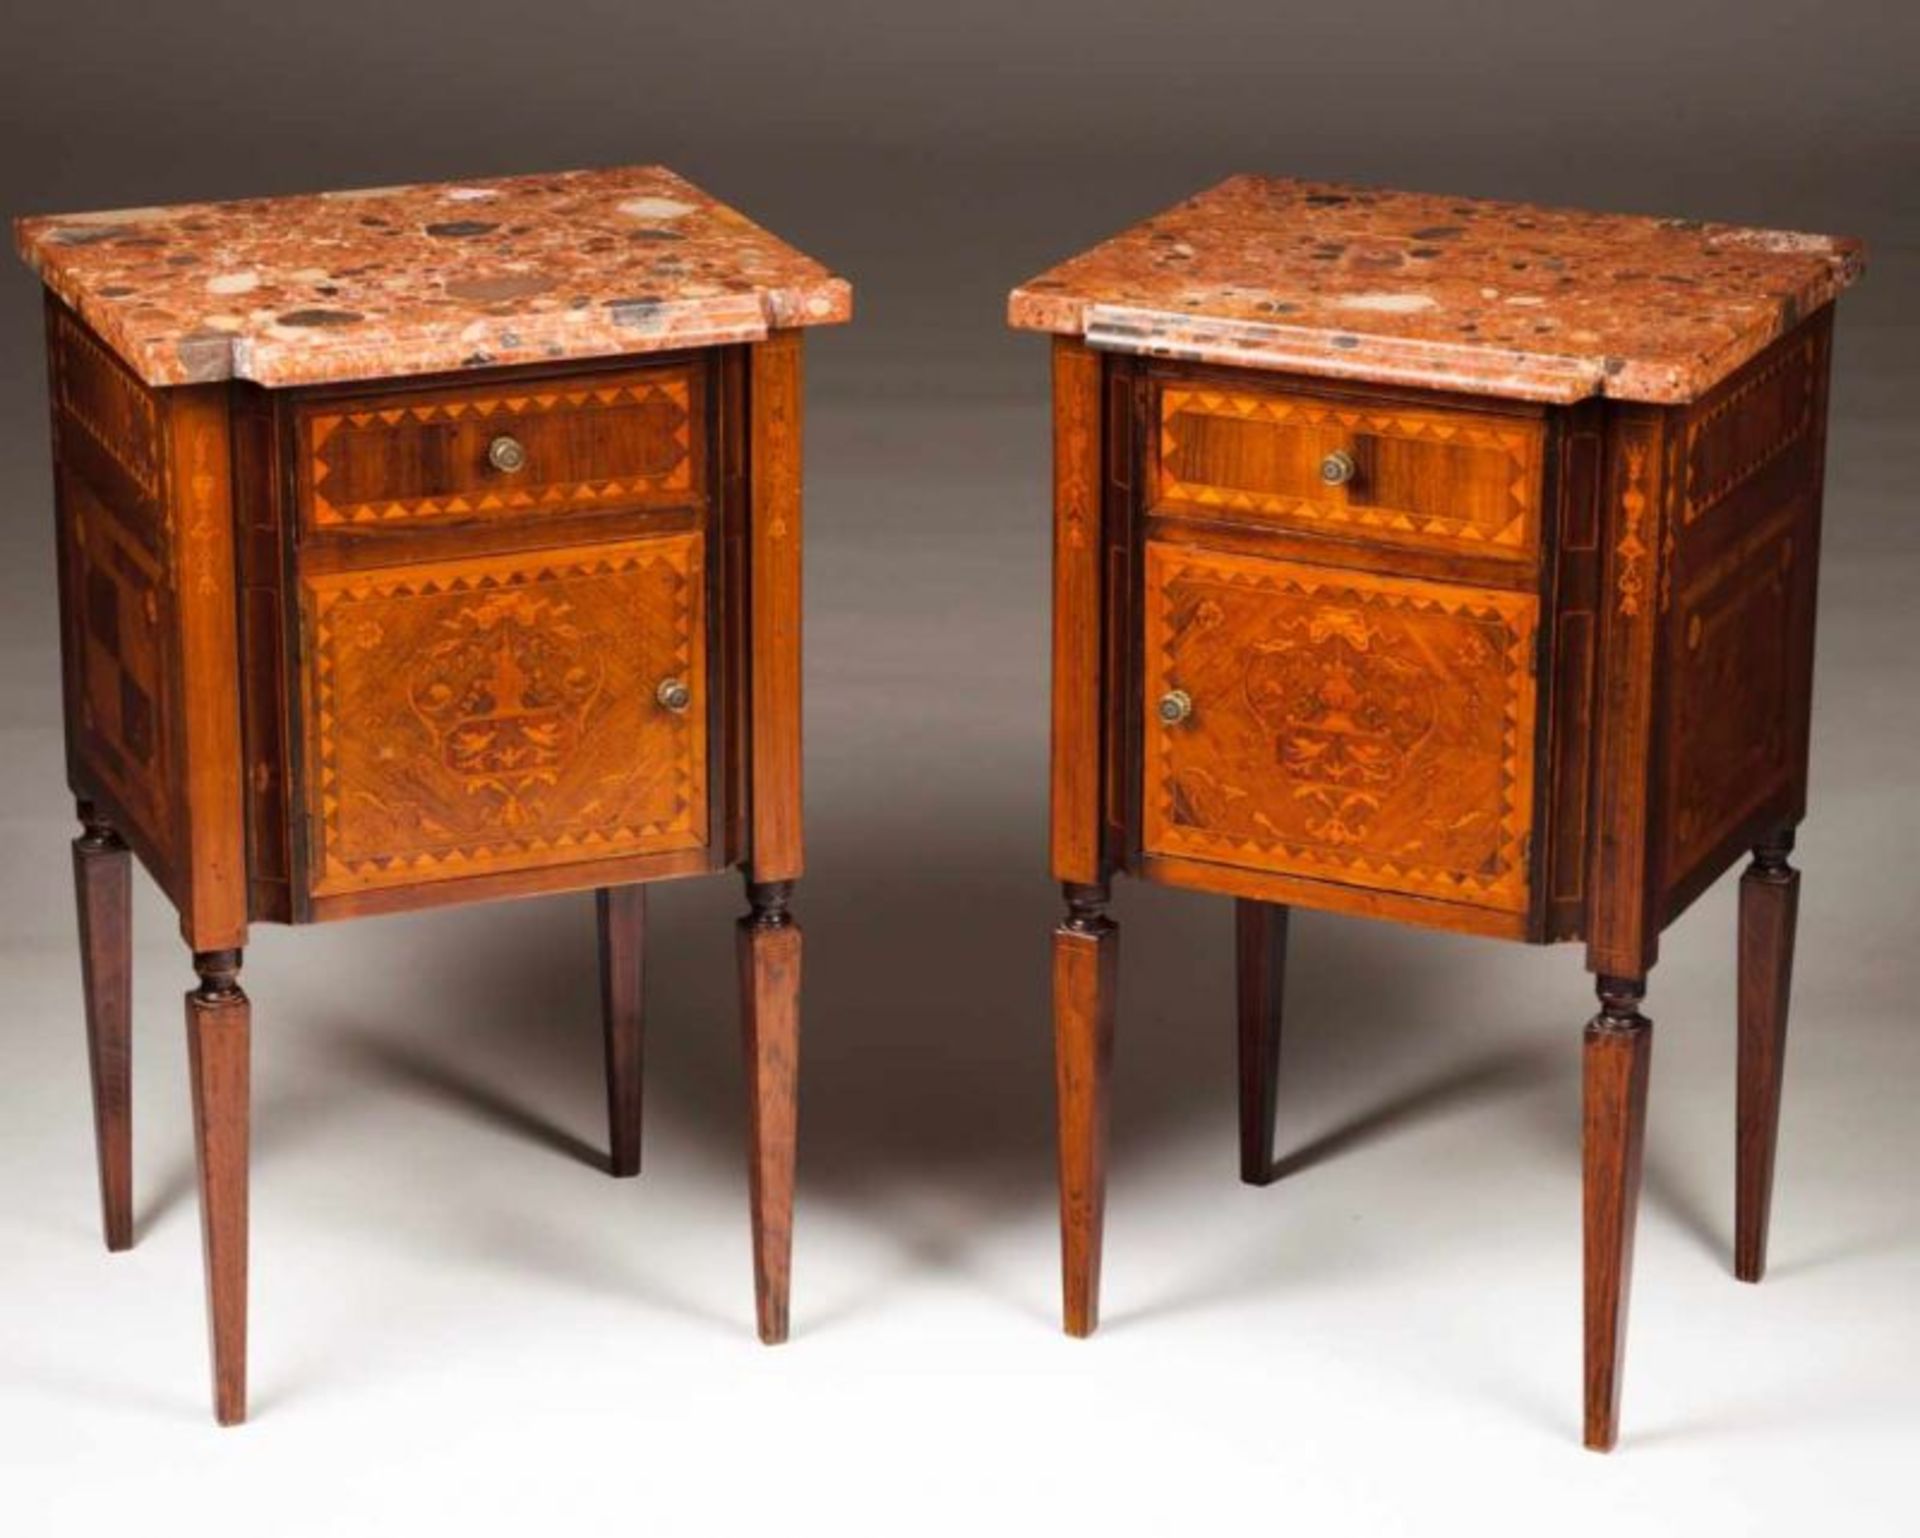 A pair of D. Maria (1777-1816) side tables Rosewood and satinwood marquetry Marble top Portugal,